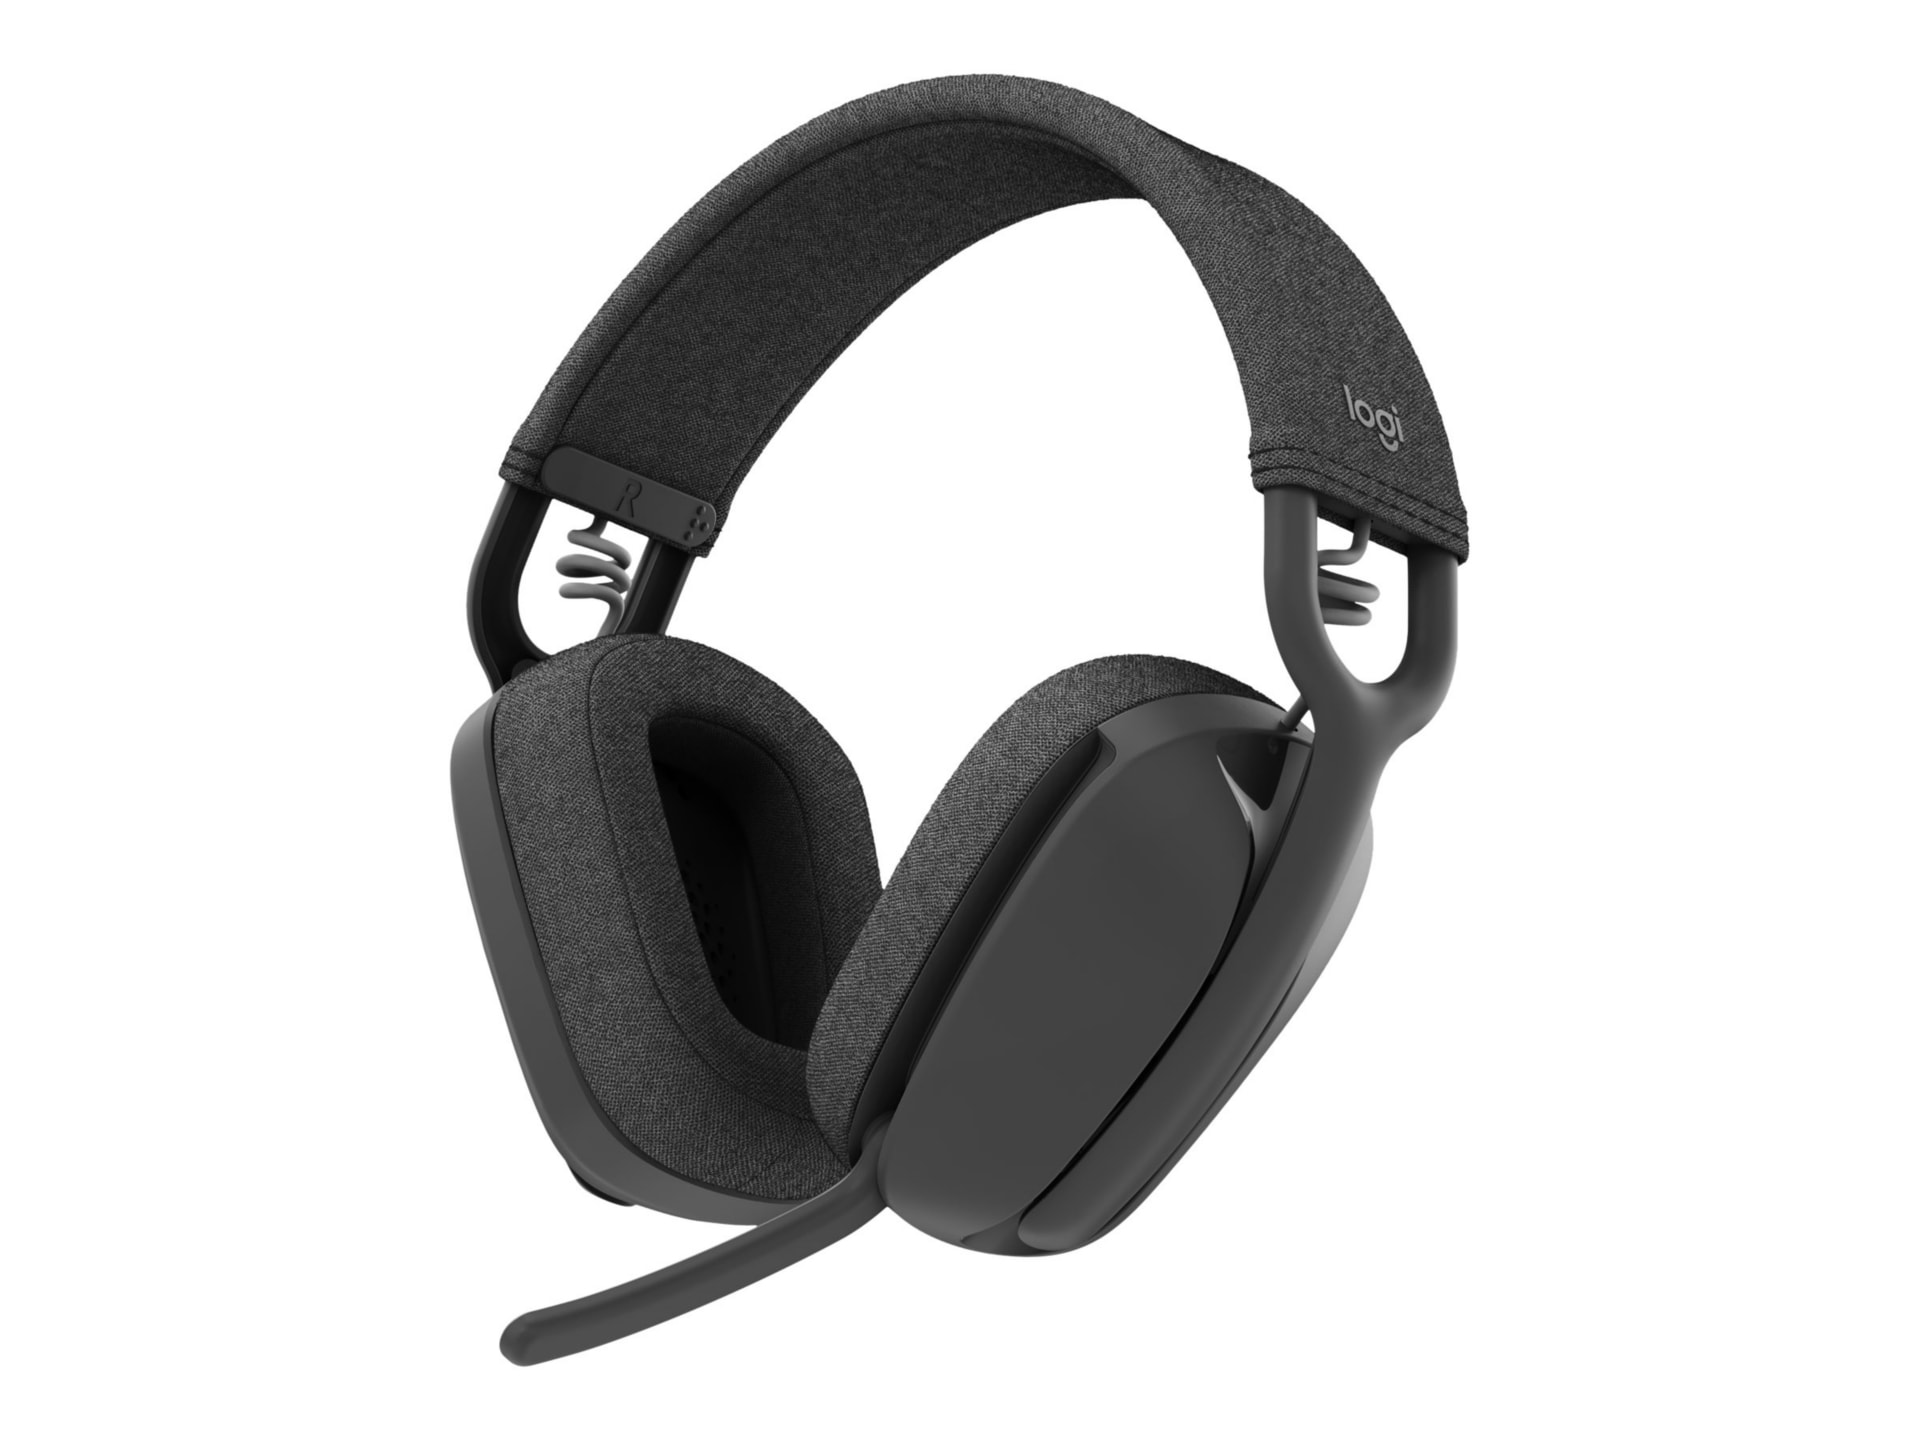 Logitech Zone Vibe Wireless Bluetooth headphones with noise-canceling mic,